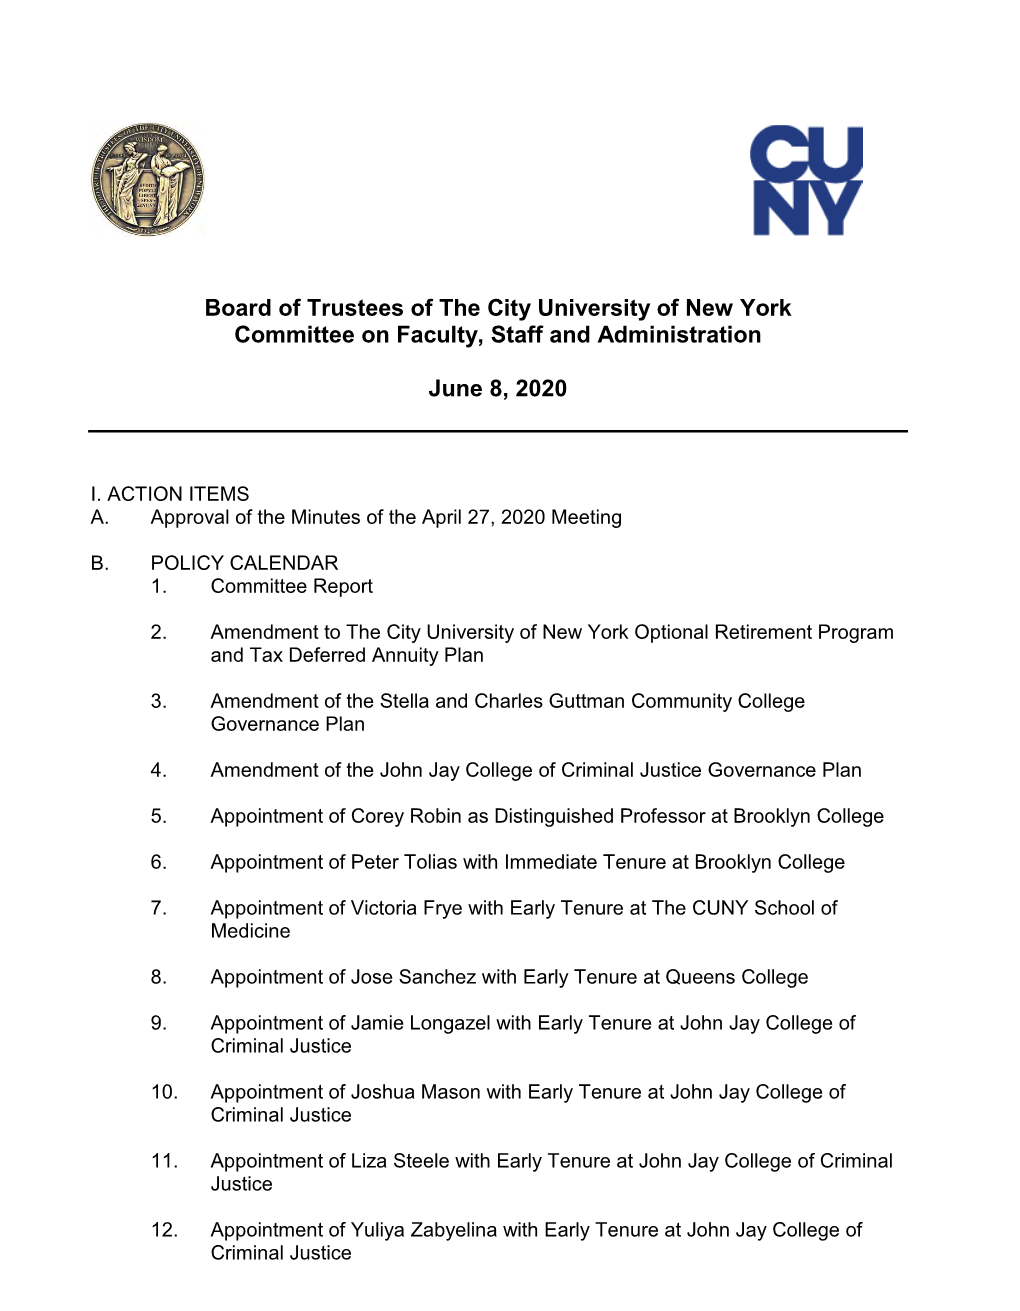 Board of Trustees of the City University of New York Committee on Faculty, Staff and Administration